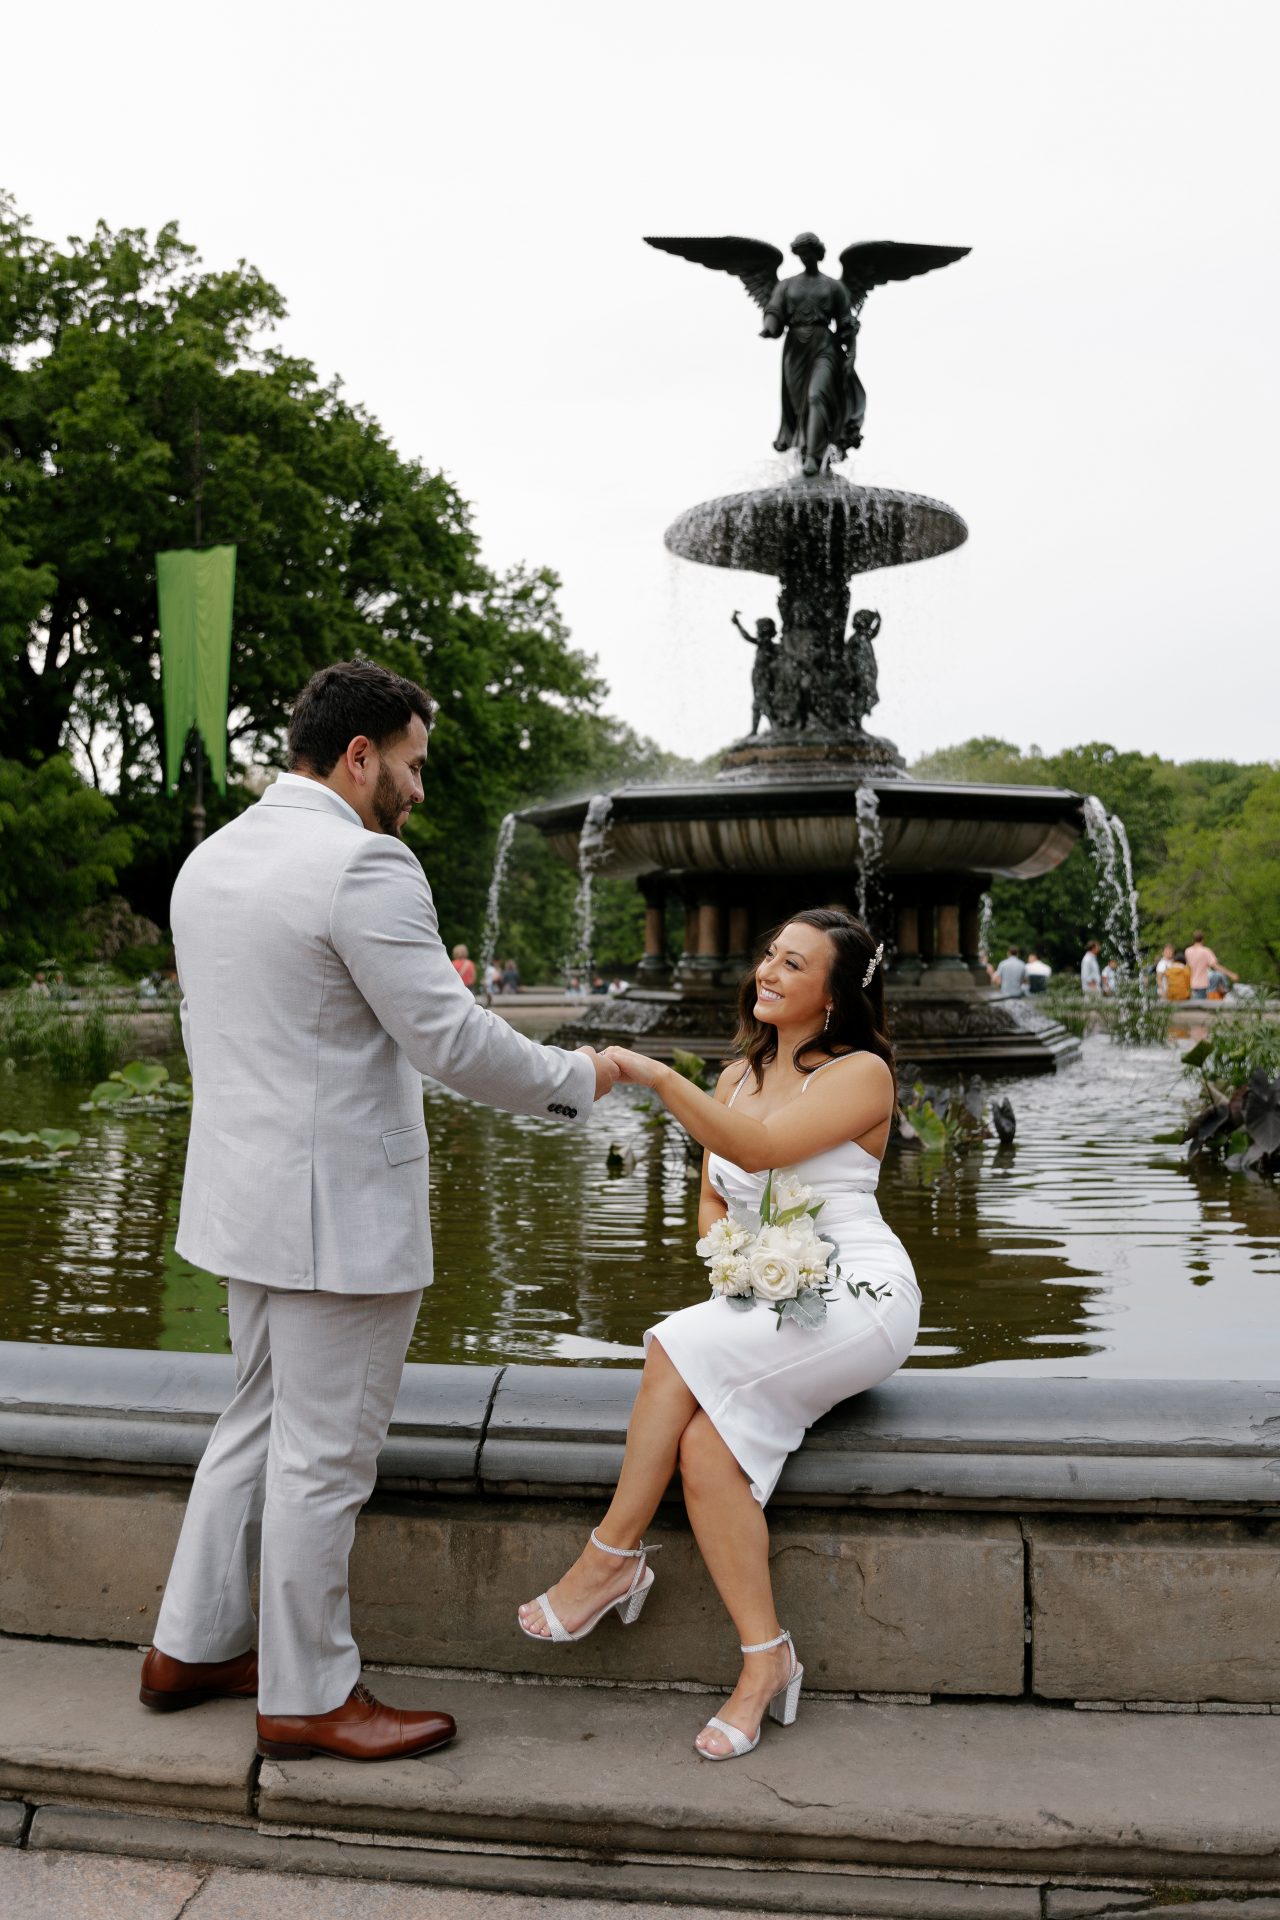 Simple wedding in Central Park NY 5